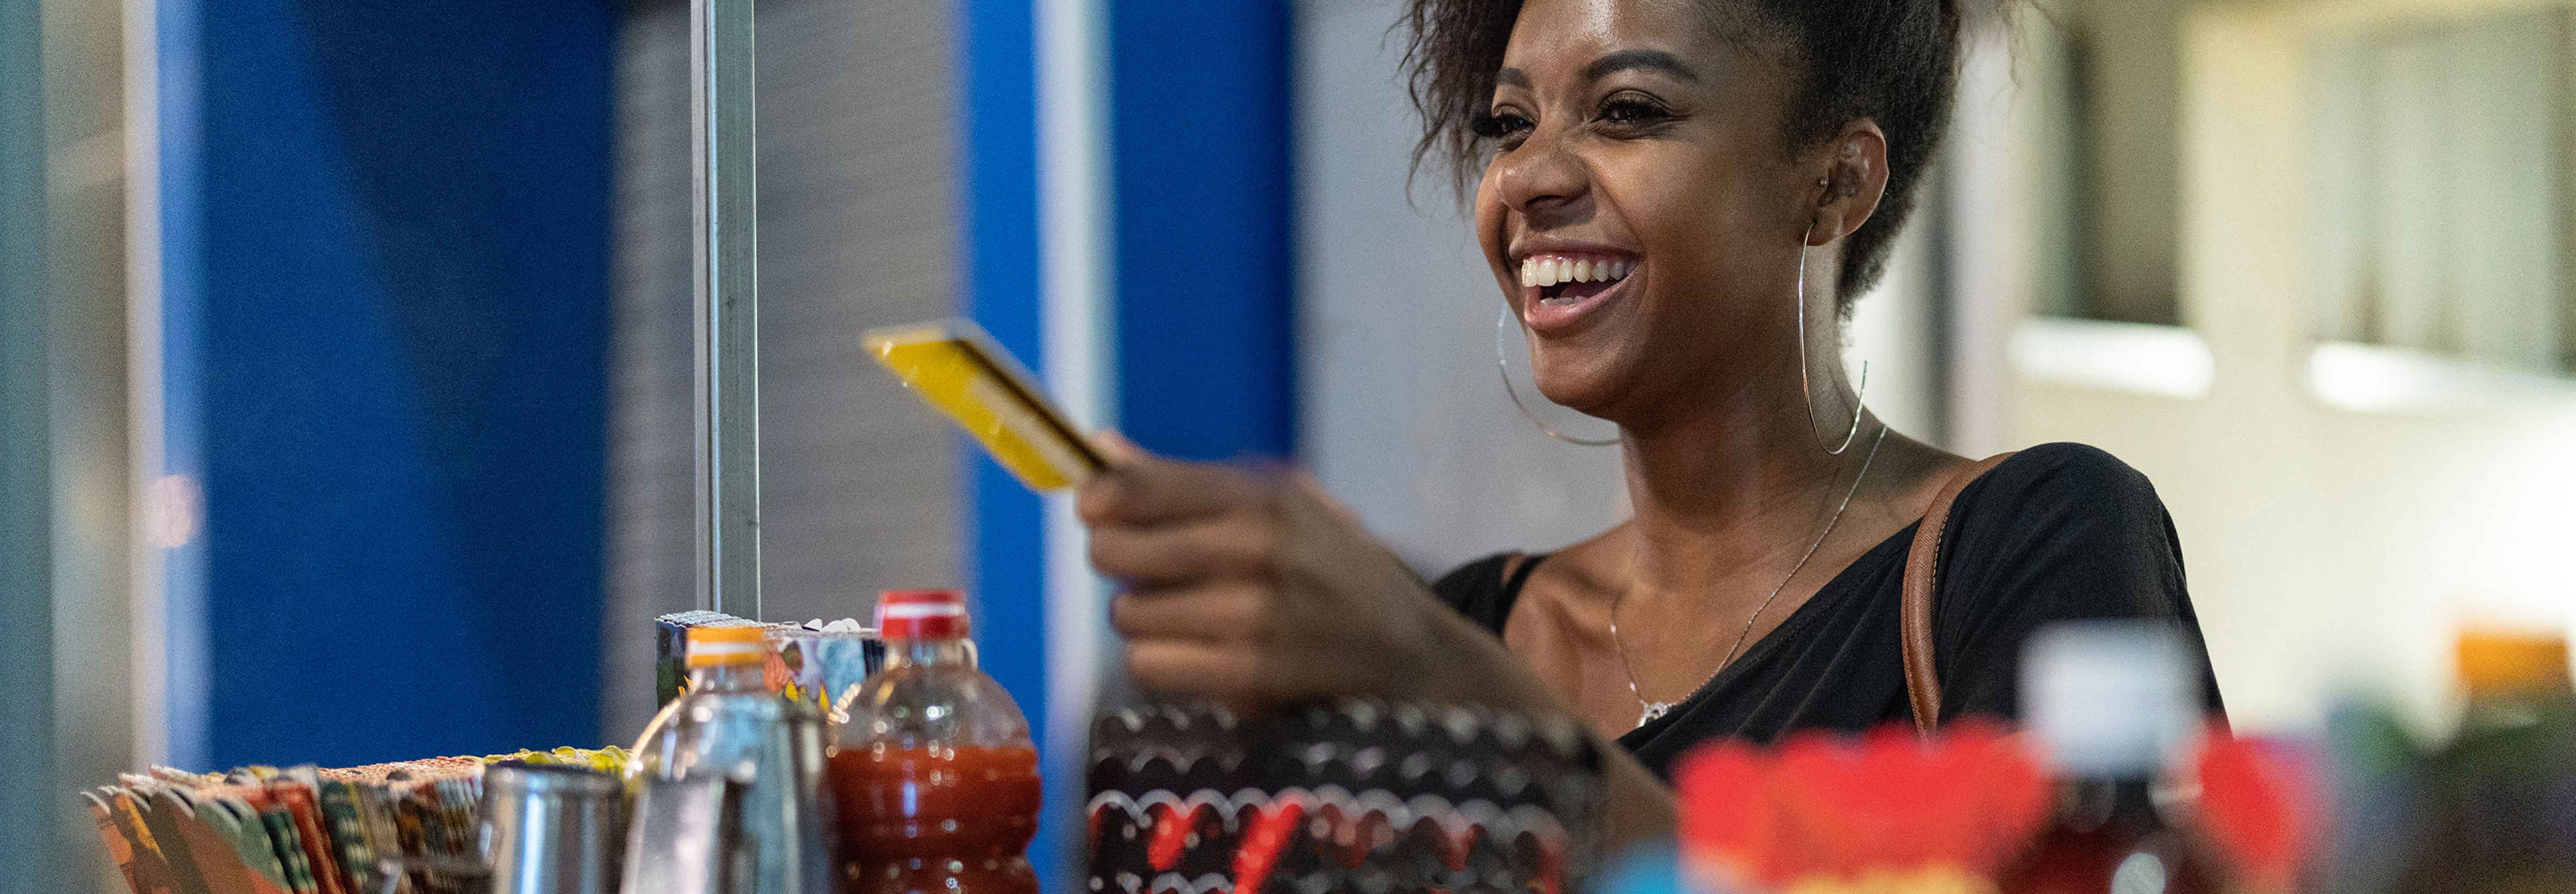 A woman smiling while paying with her debit card